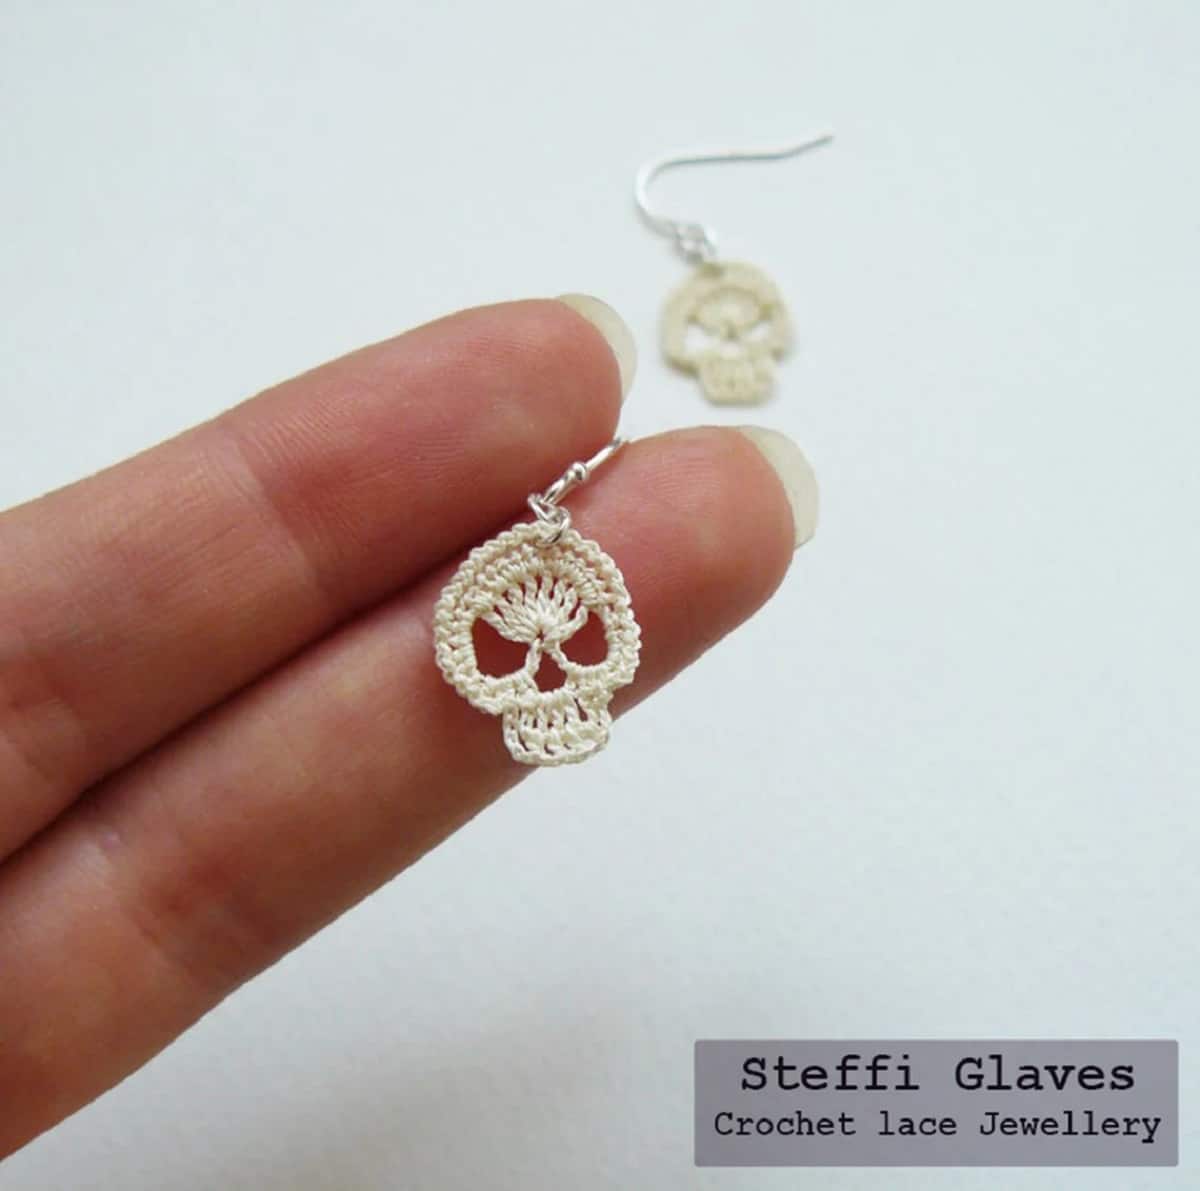 Two fingers with a small crochet skull earring on them. The other earring can be seen underneath on the white background.